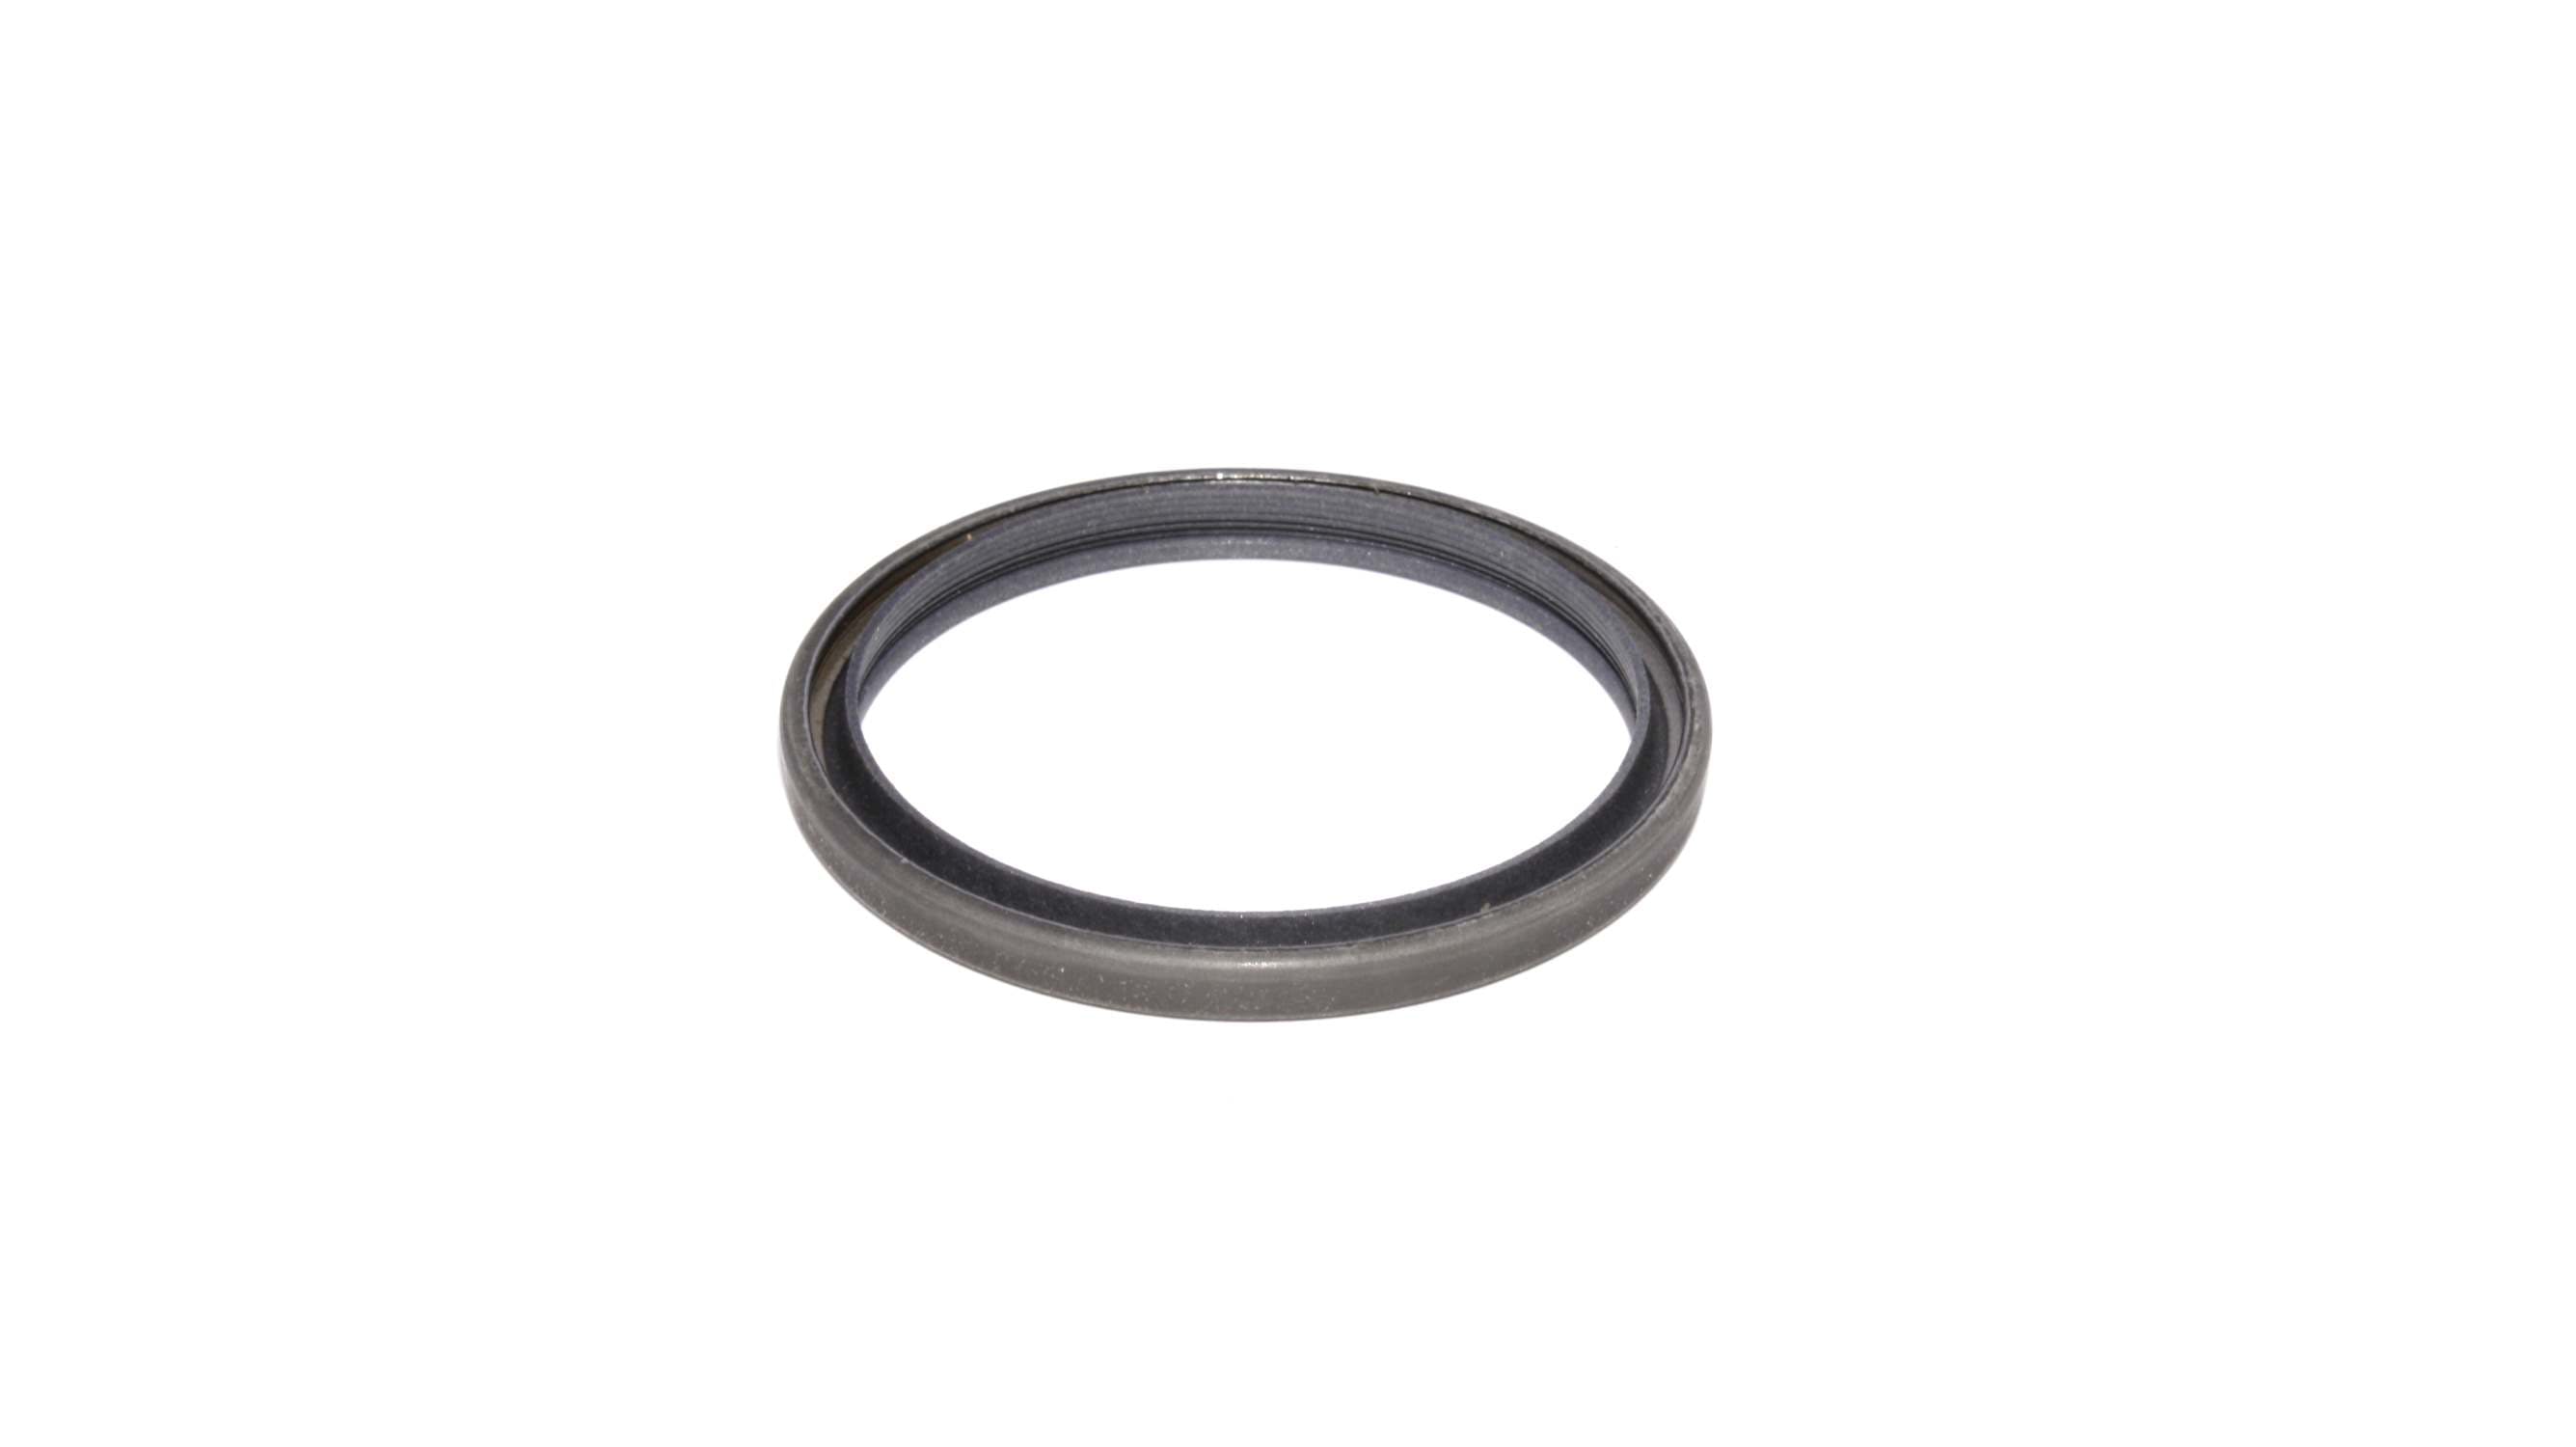 Competition Cams 6500US-1 Hi-Tech Belt Drive System Upper Replacement Oil Seal